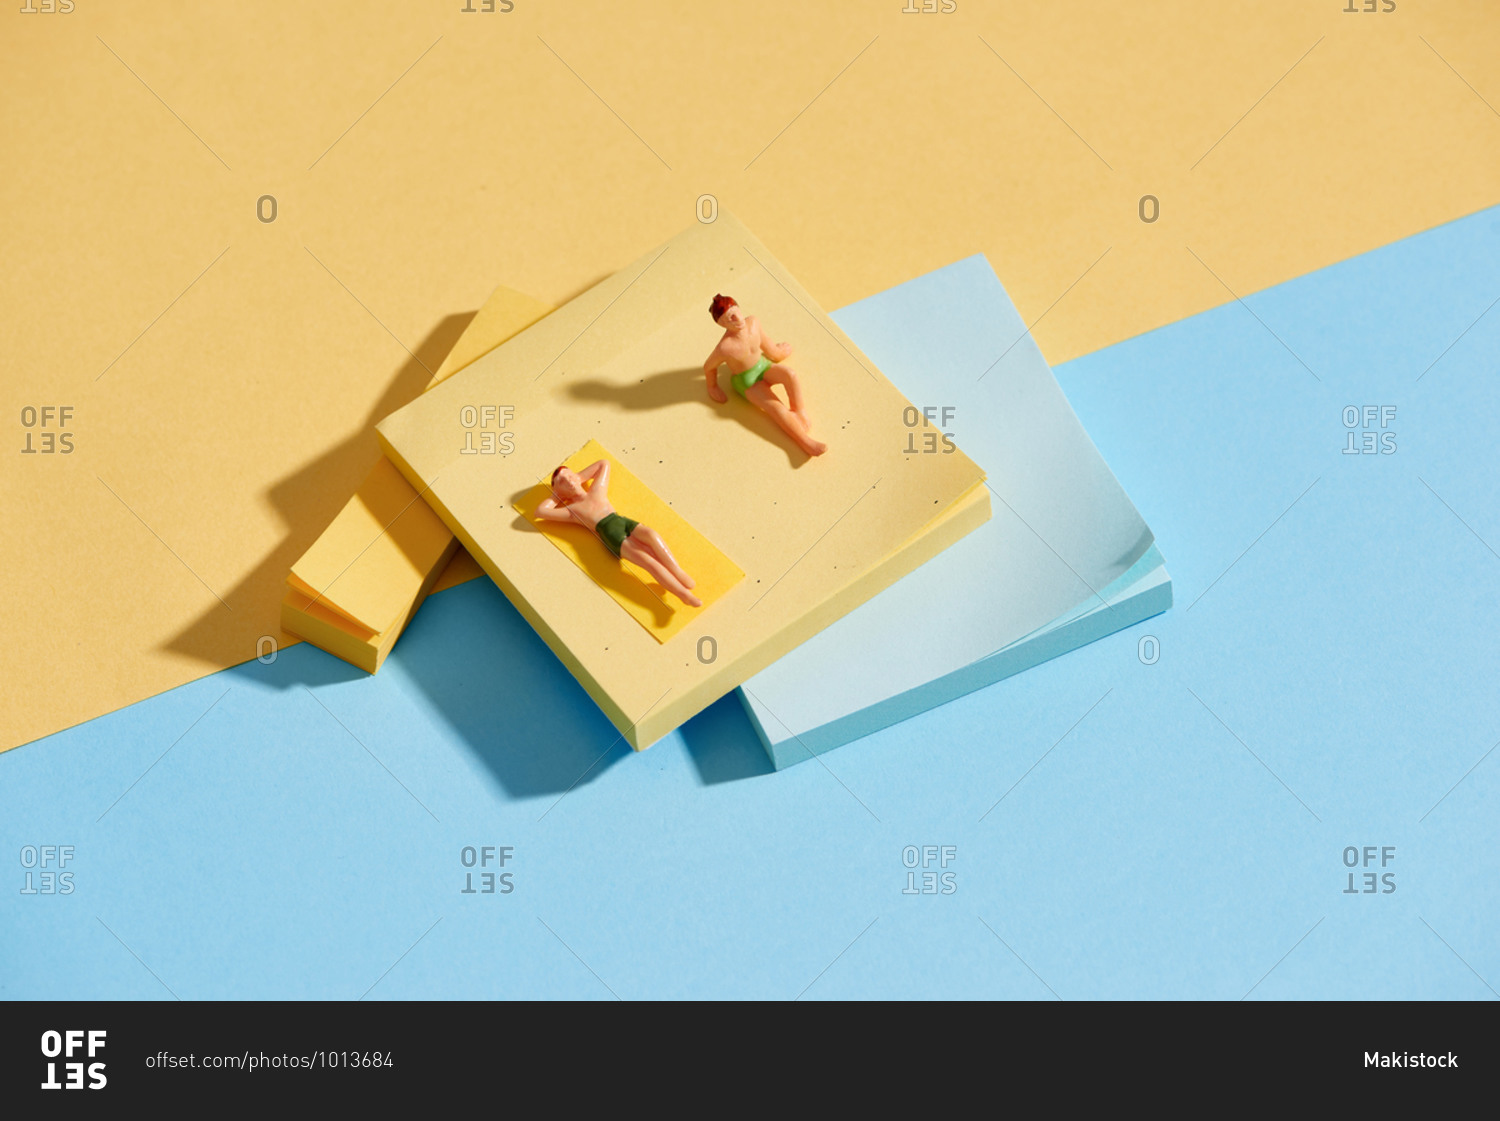 Miniature men sunbathing and relaxing on beach vacation concept